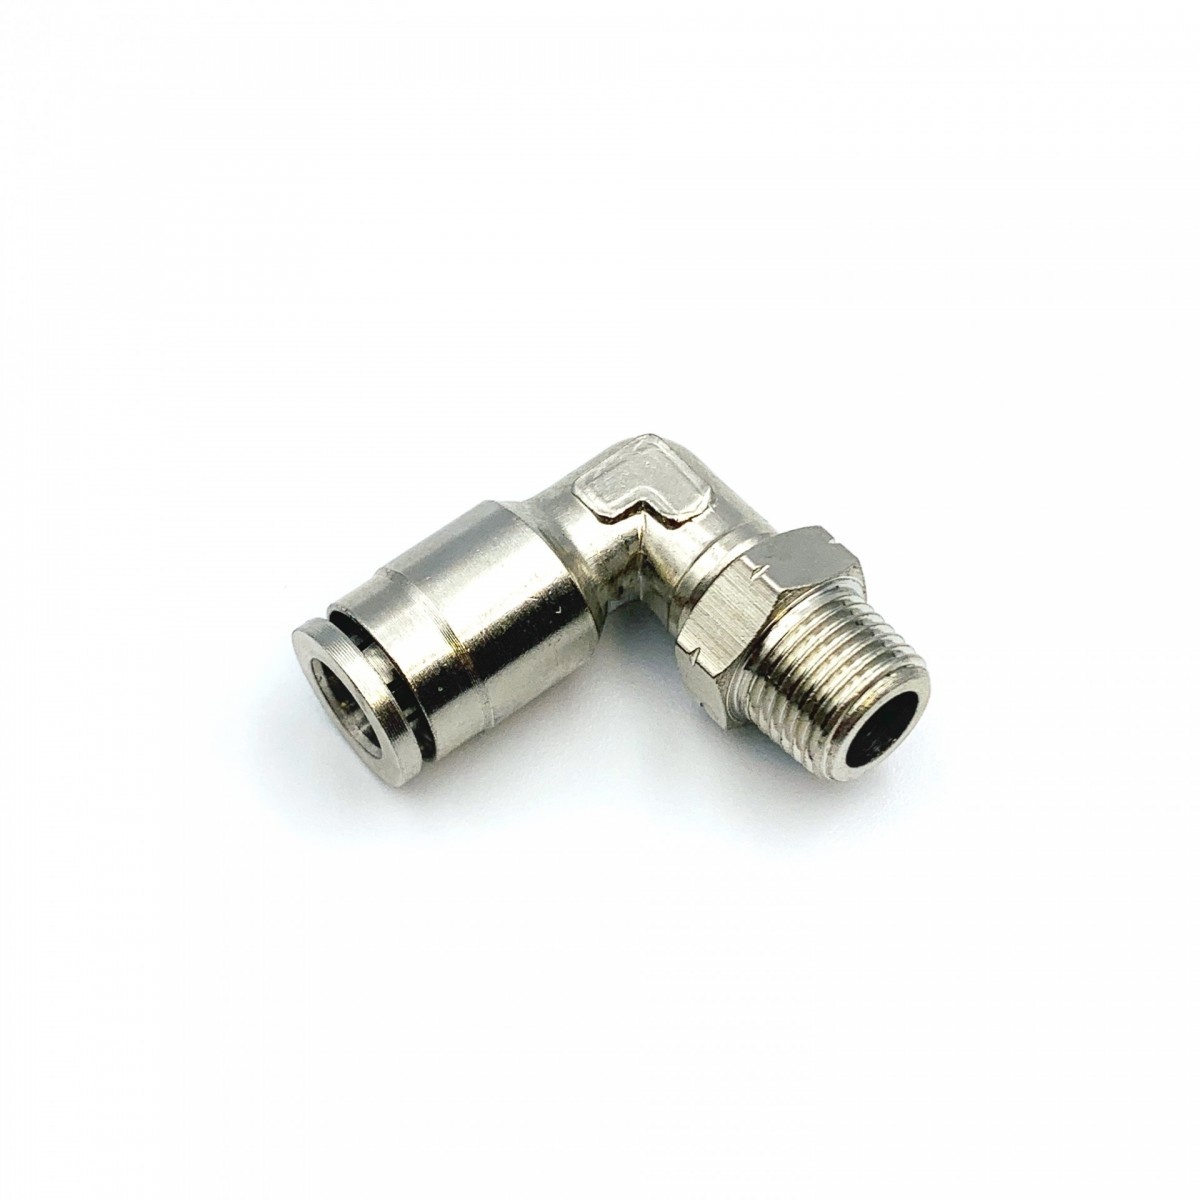 Epes Epes HPA 6mm Hose Coupling 90 Degree - Outer 1/8 NPT